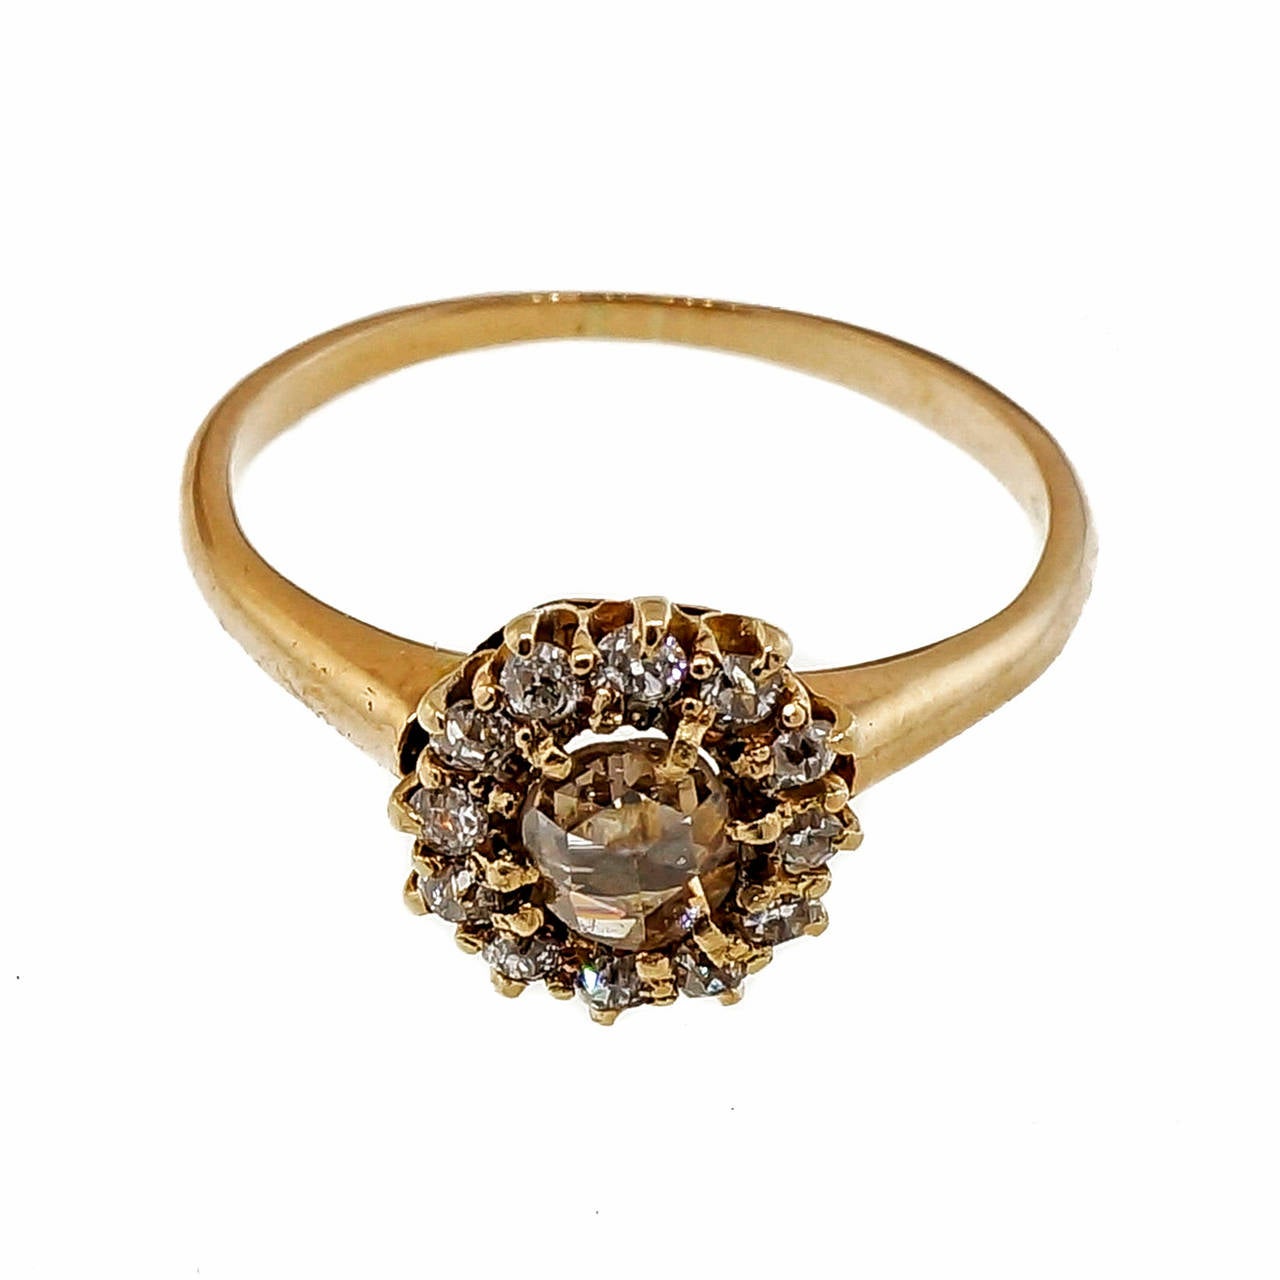 Victorian 1880 light brownish yellow and rose cut diamonds .28ct pink gold ring with old mine cut diamonds surrounding it. Just a hint of pink to the diamonds also.

1 rose cut diamond, approx. total weight .28cts, light yellowish brown (U-V), I1,